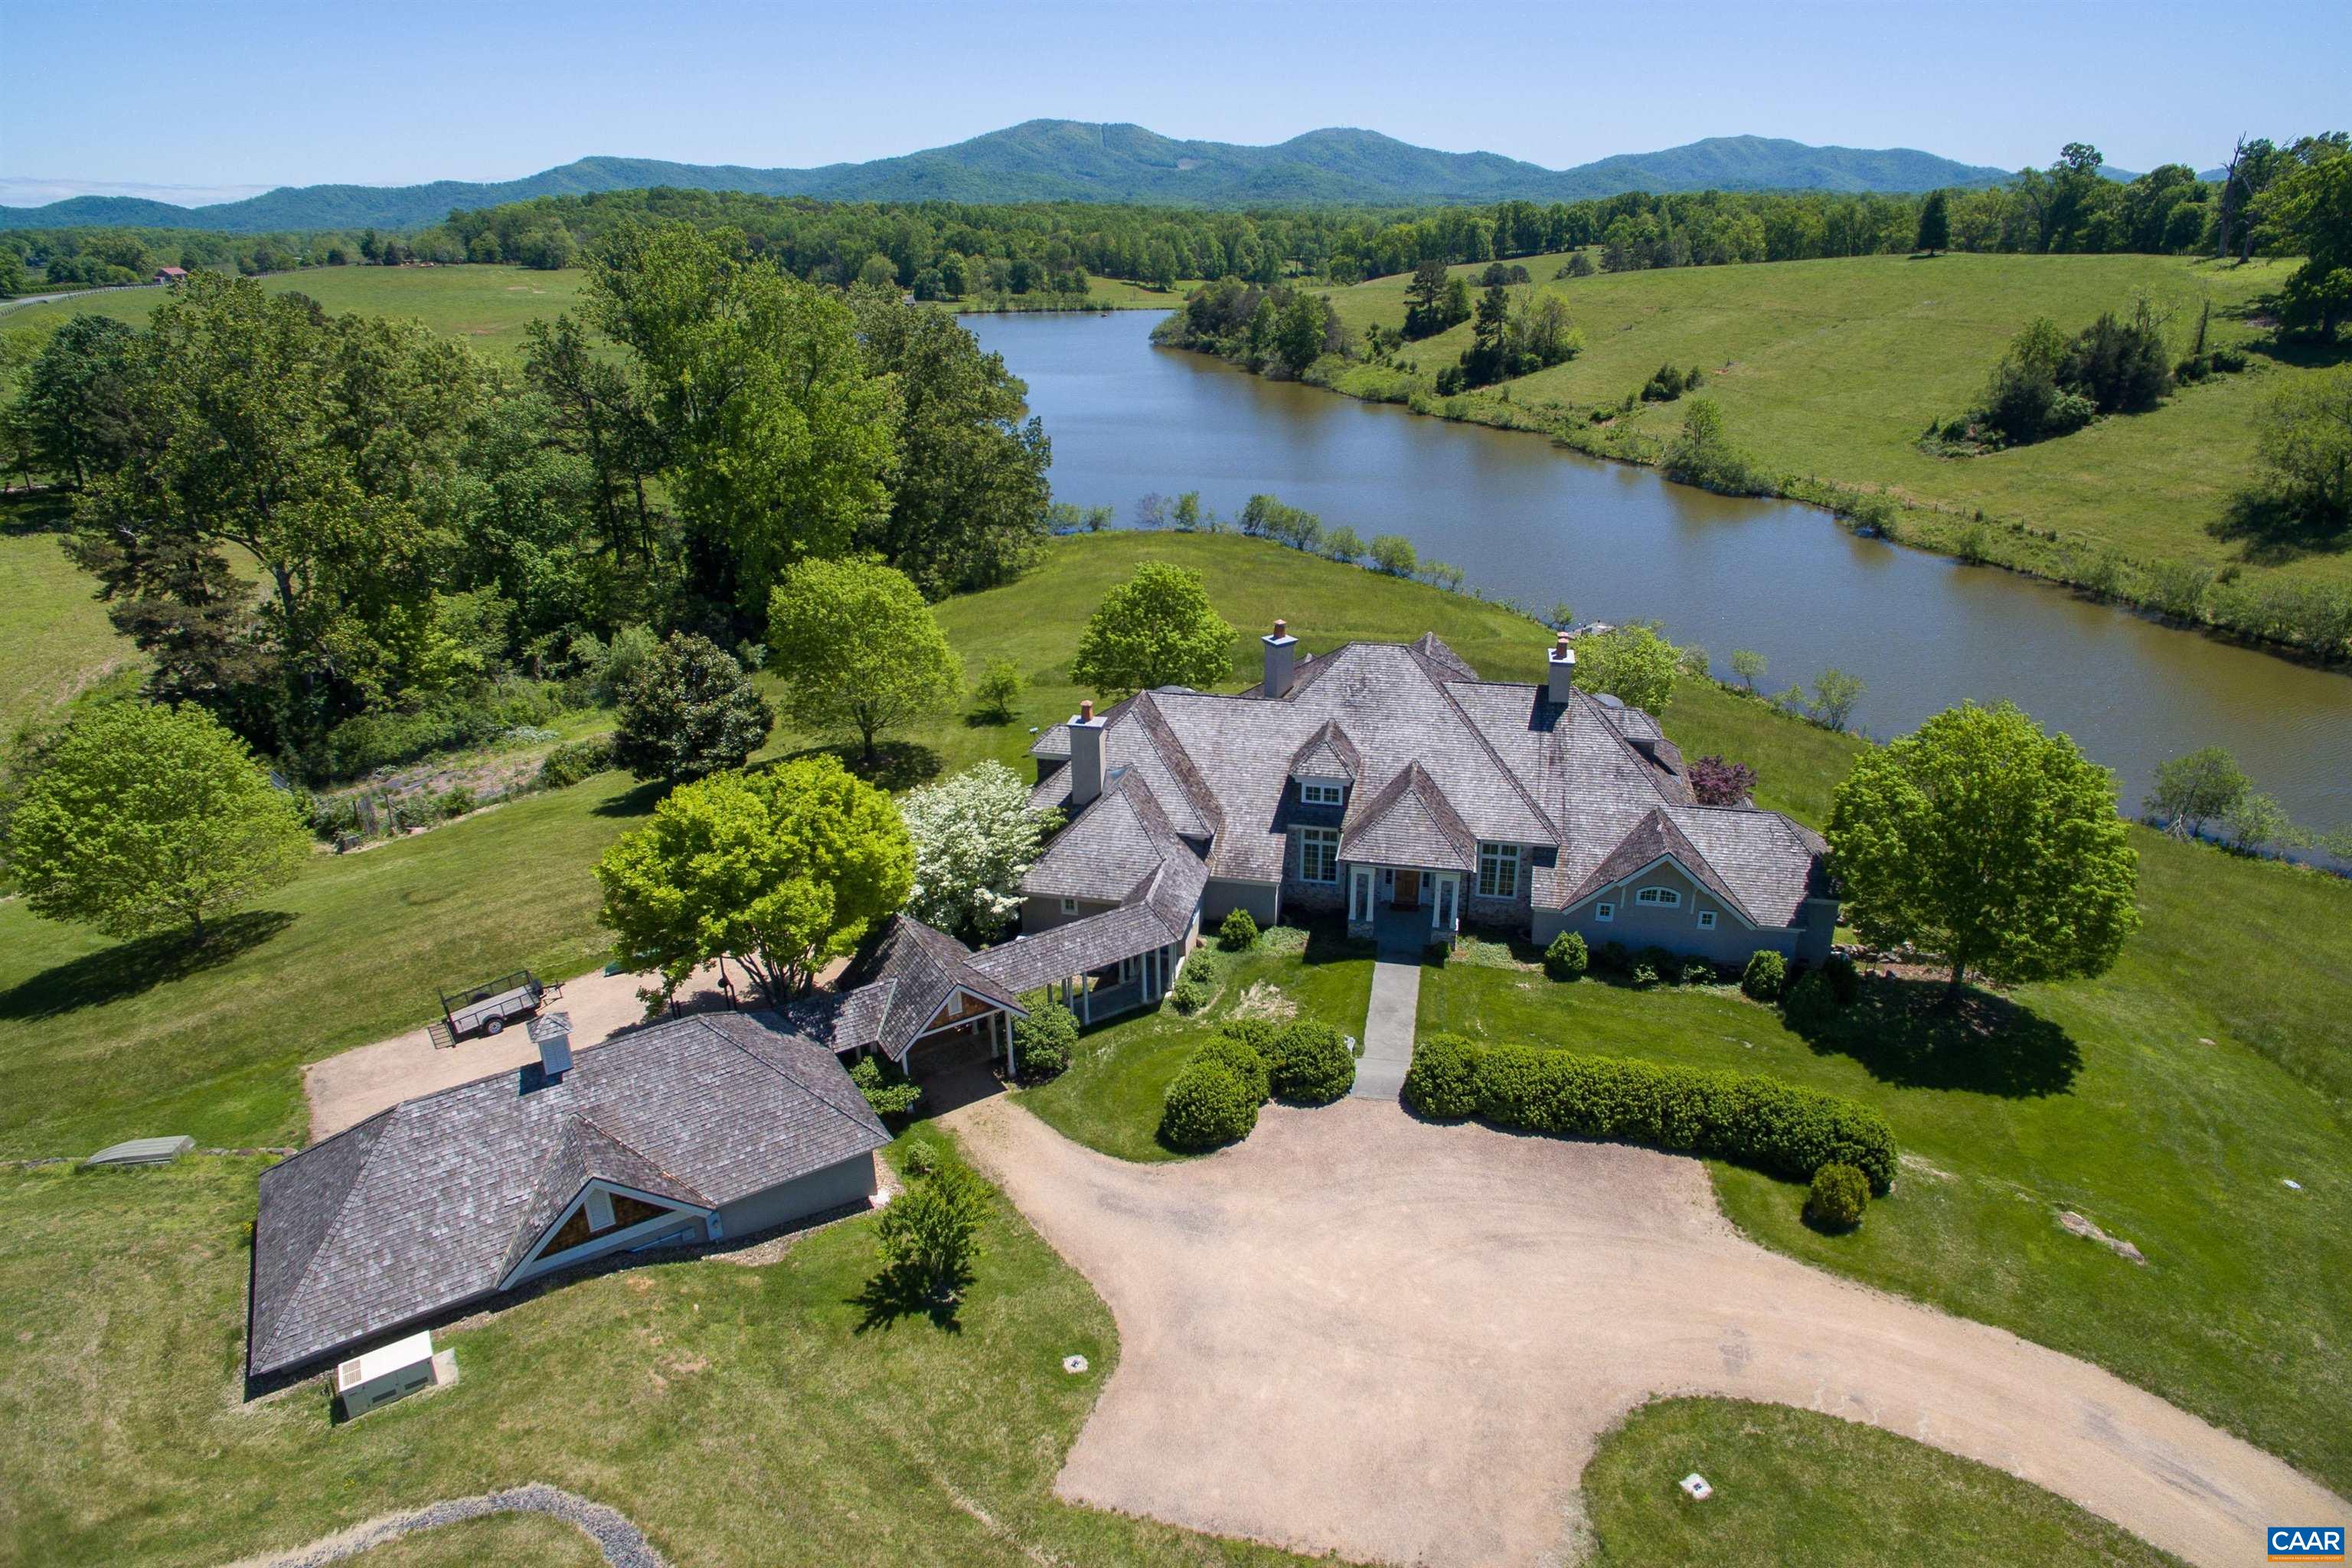 Hard to believe a property with 360 degree views, 15+ acre lake, lush rolling fields of rich grass and a spectacular 5-bedroom home with tall ceilings, heart pine floors, four fireplaces, a study, garages and unparalleled views exists. Located in Greenwood, this exceptional 317-acre property is a gem; a one-of-a-kind, not to be replicated, gem. Add to all mentioned above a handsome log cabin with fireplace, stunning party barn and a two bedroom cottage. Additional acreage available.